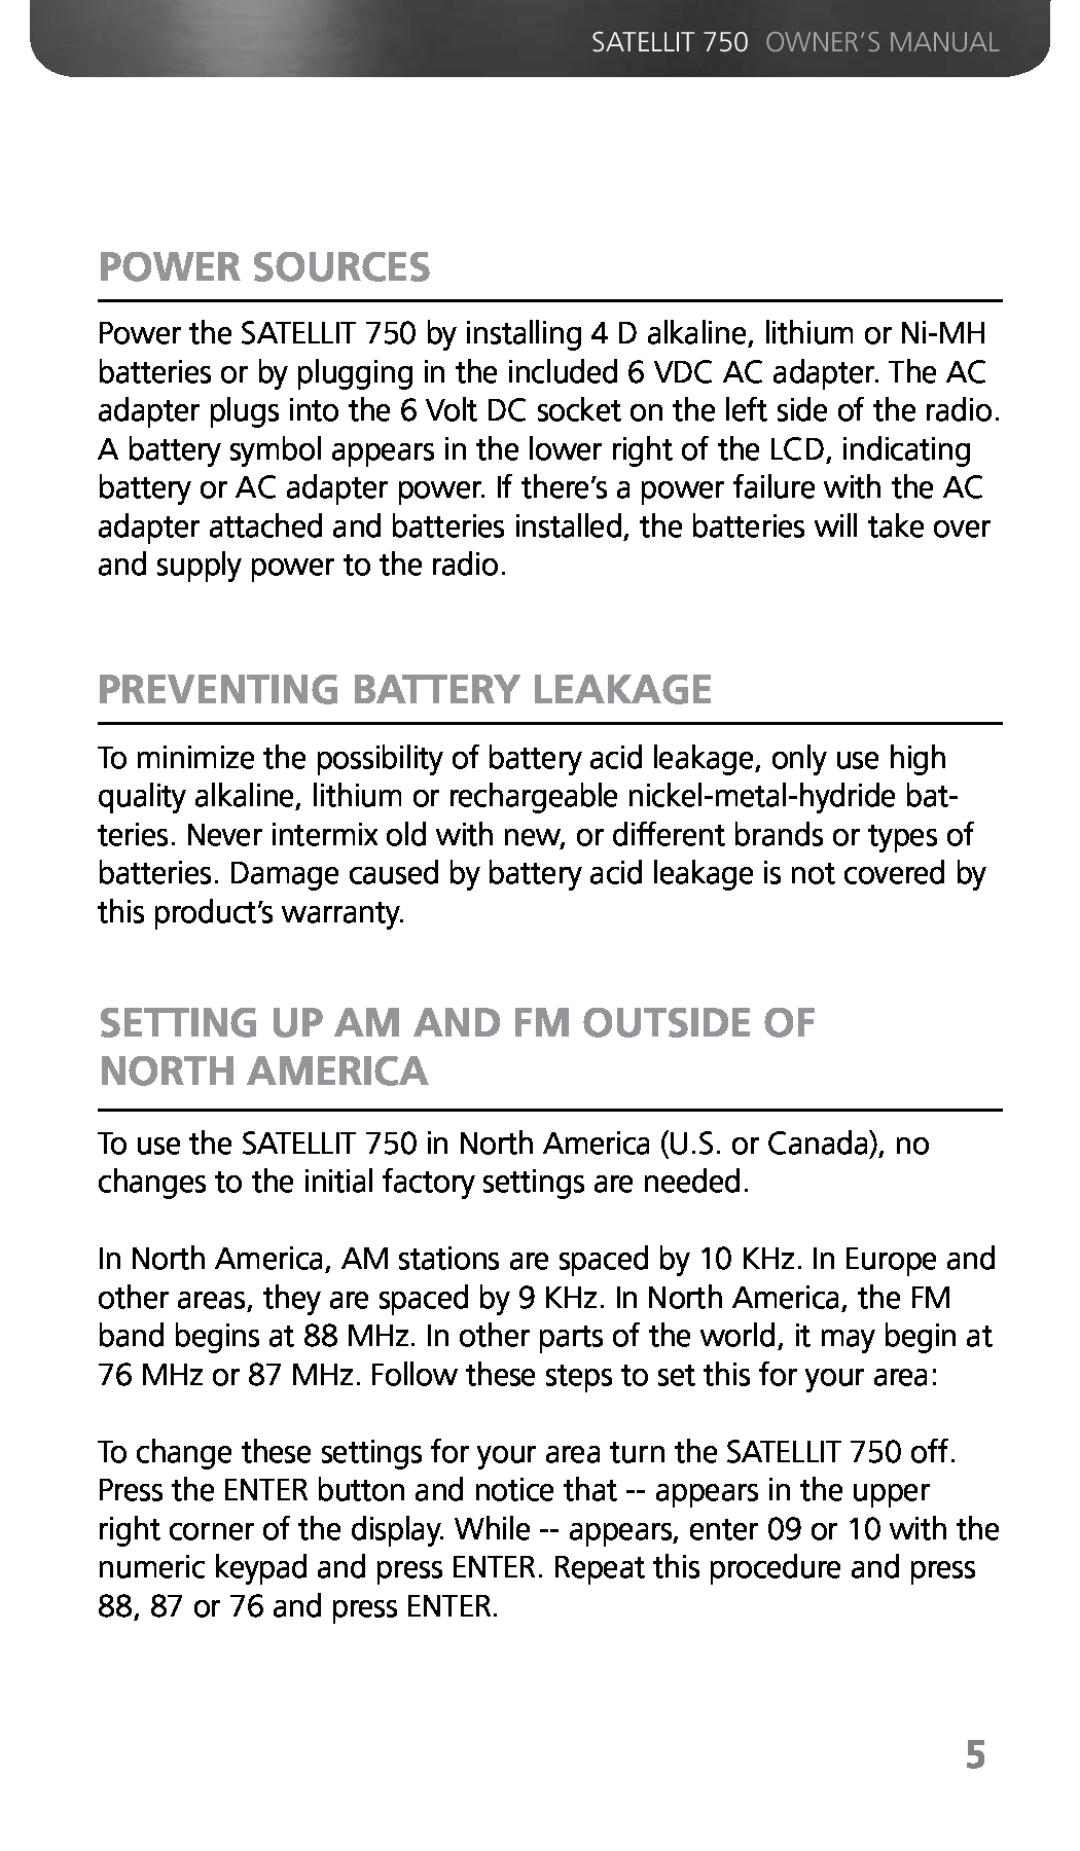 Grundig 750 owner manual Power Sources, Preventing Battery Leakage, Setting Up Am And Fm Outside Of North America 